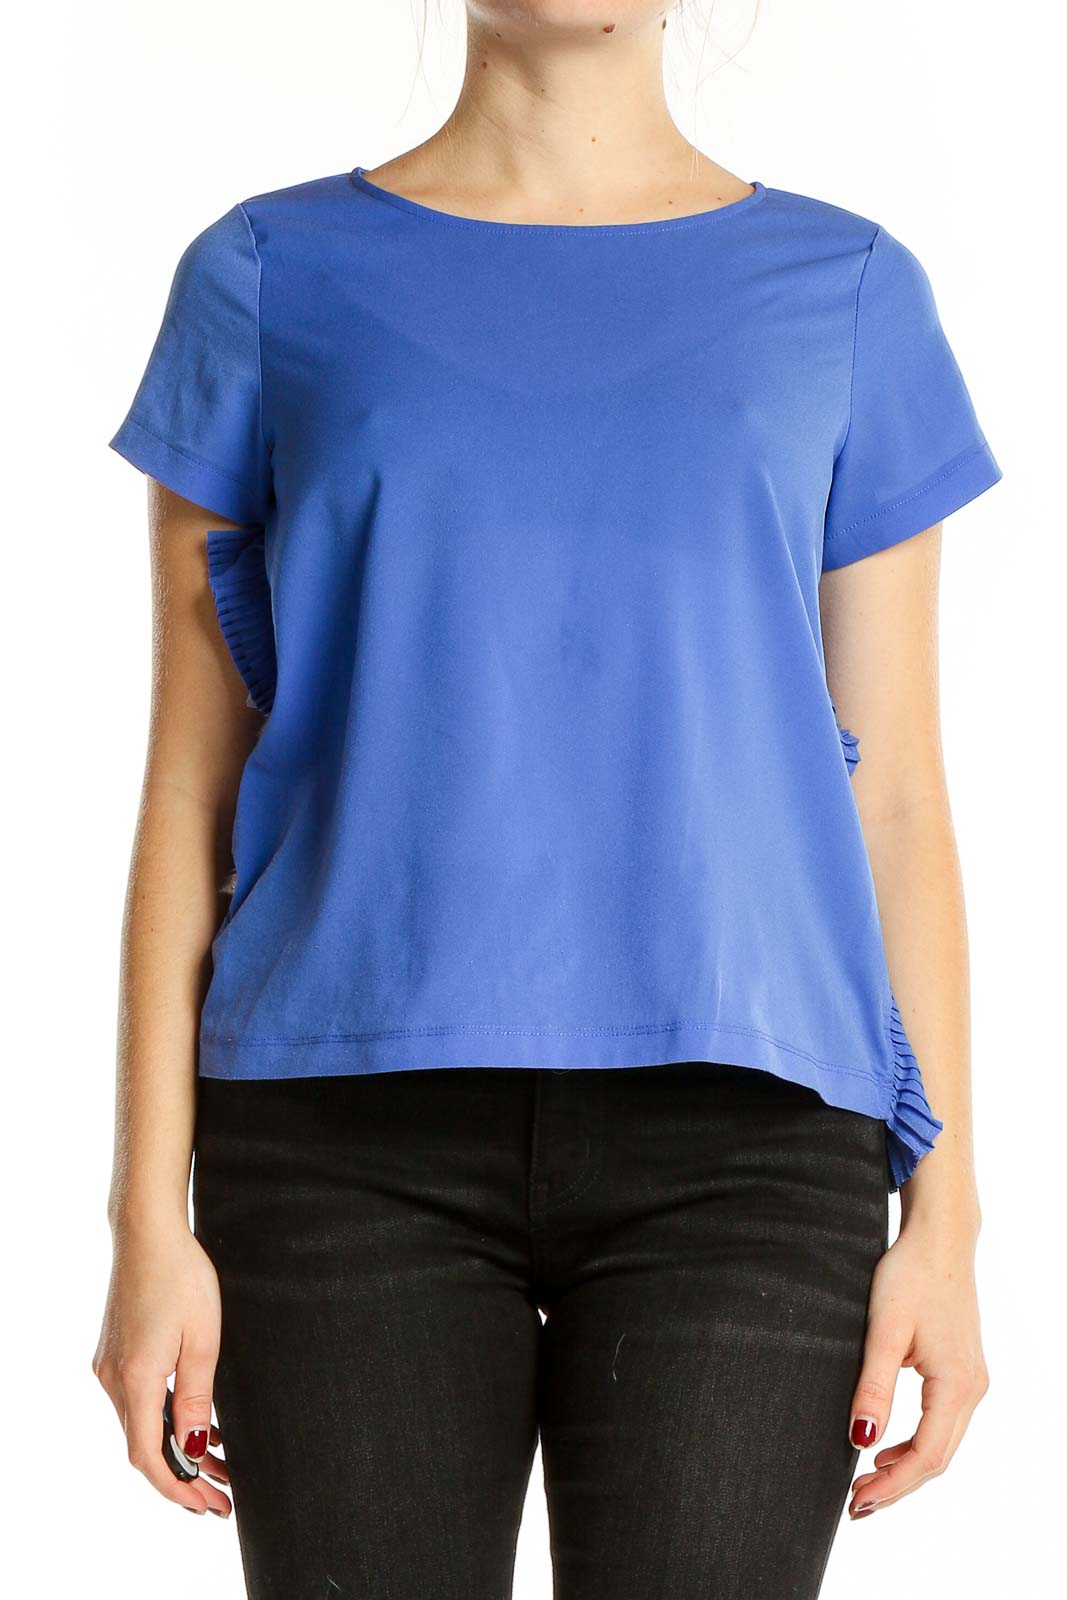 Blue Solid Top Front